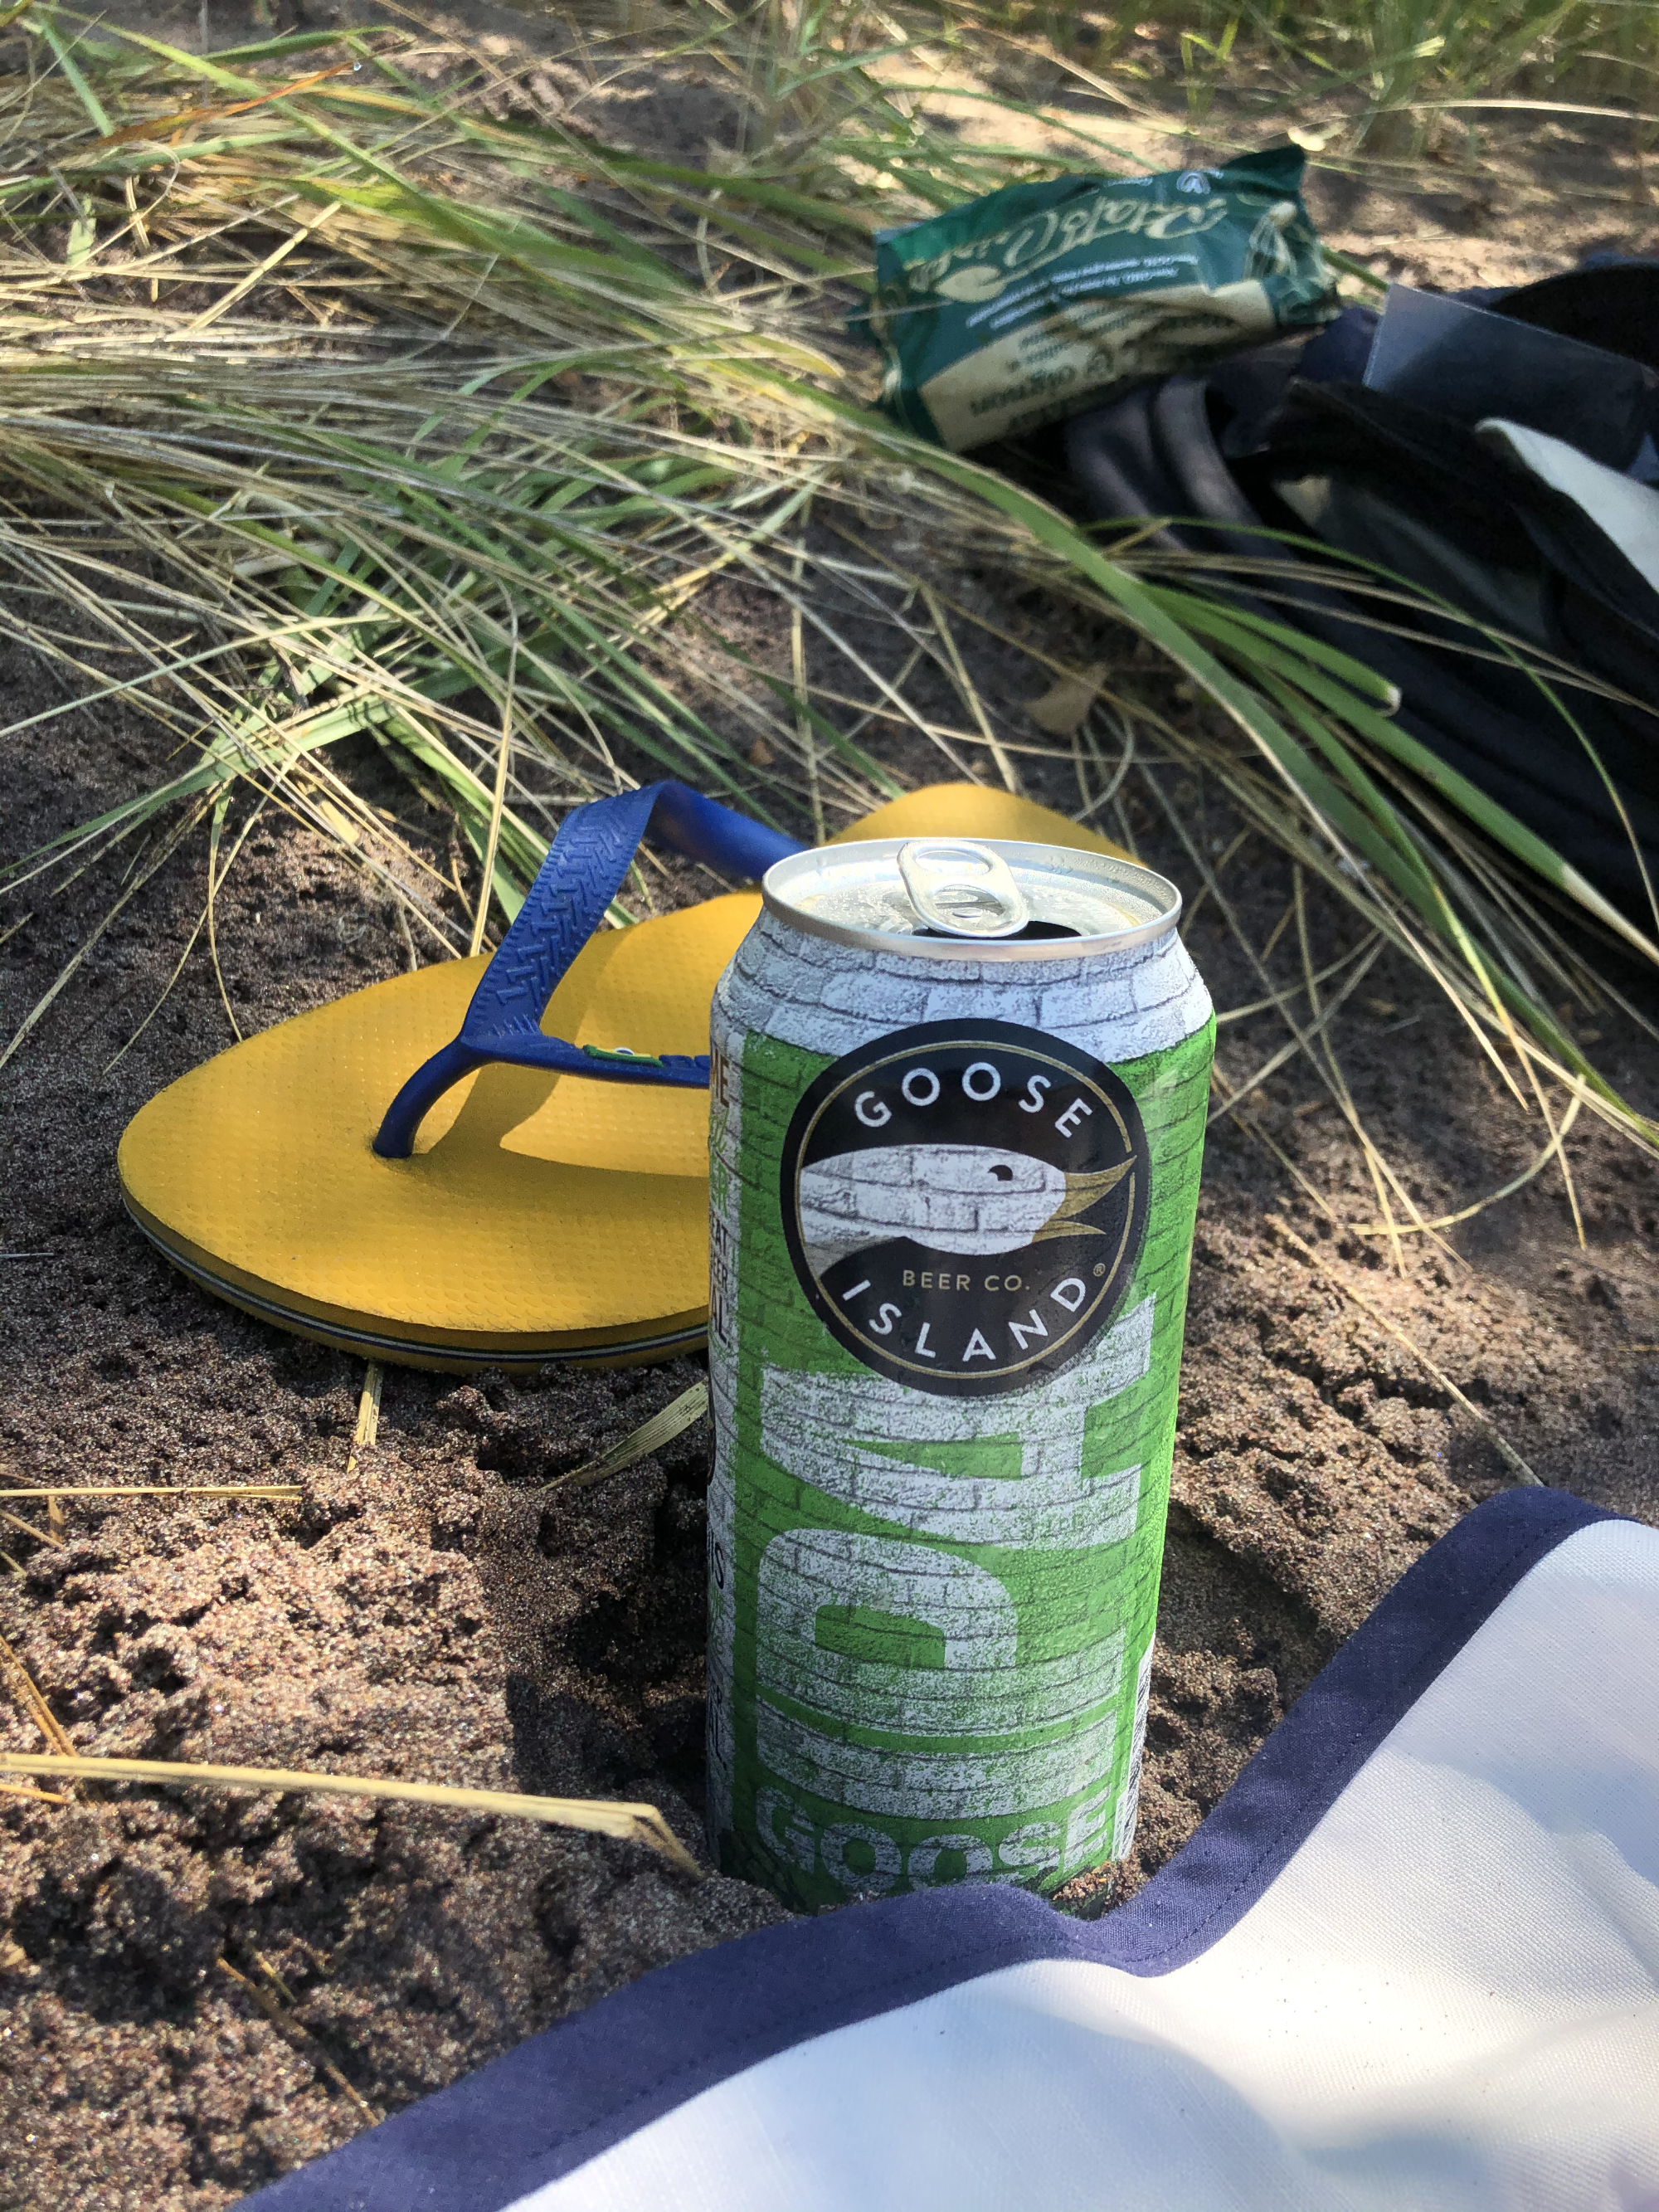 On a sandy beach, Goose Island beer can, yellow and blue hawaianas flip-flops.